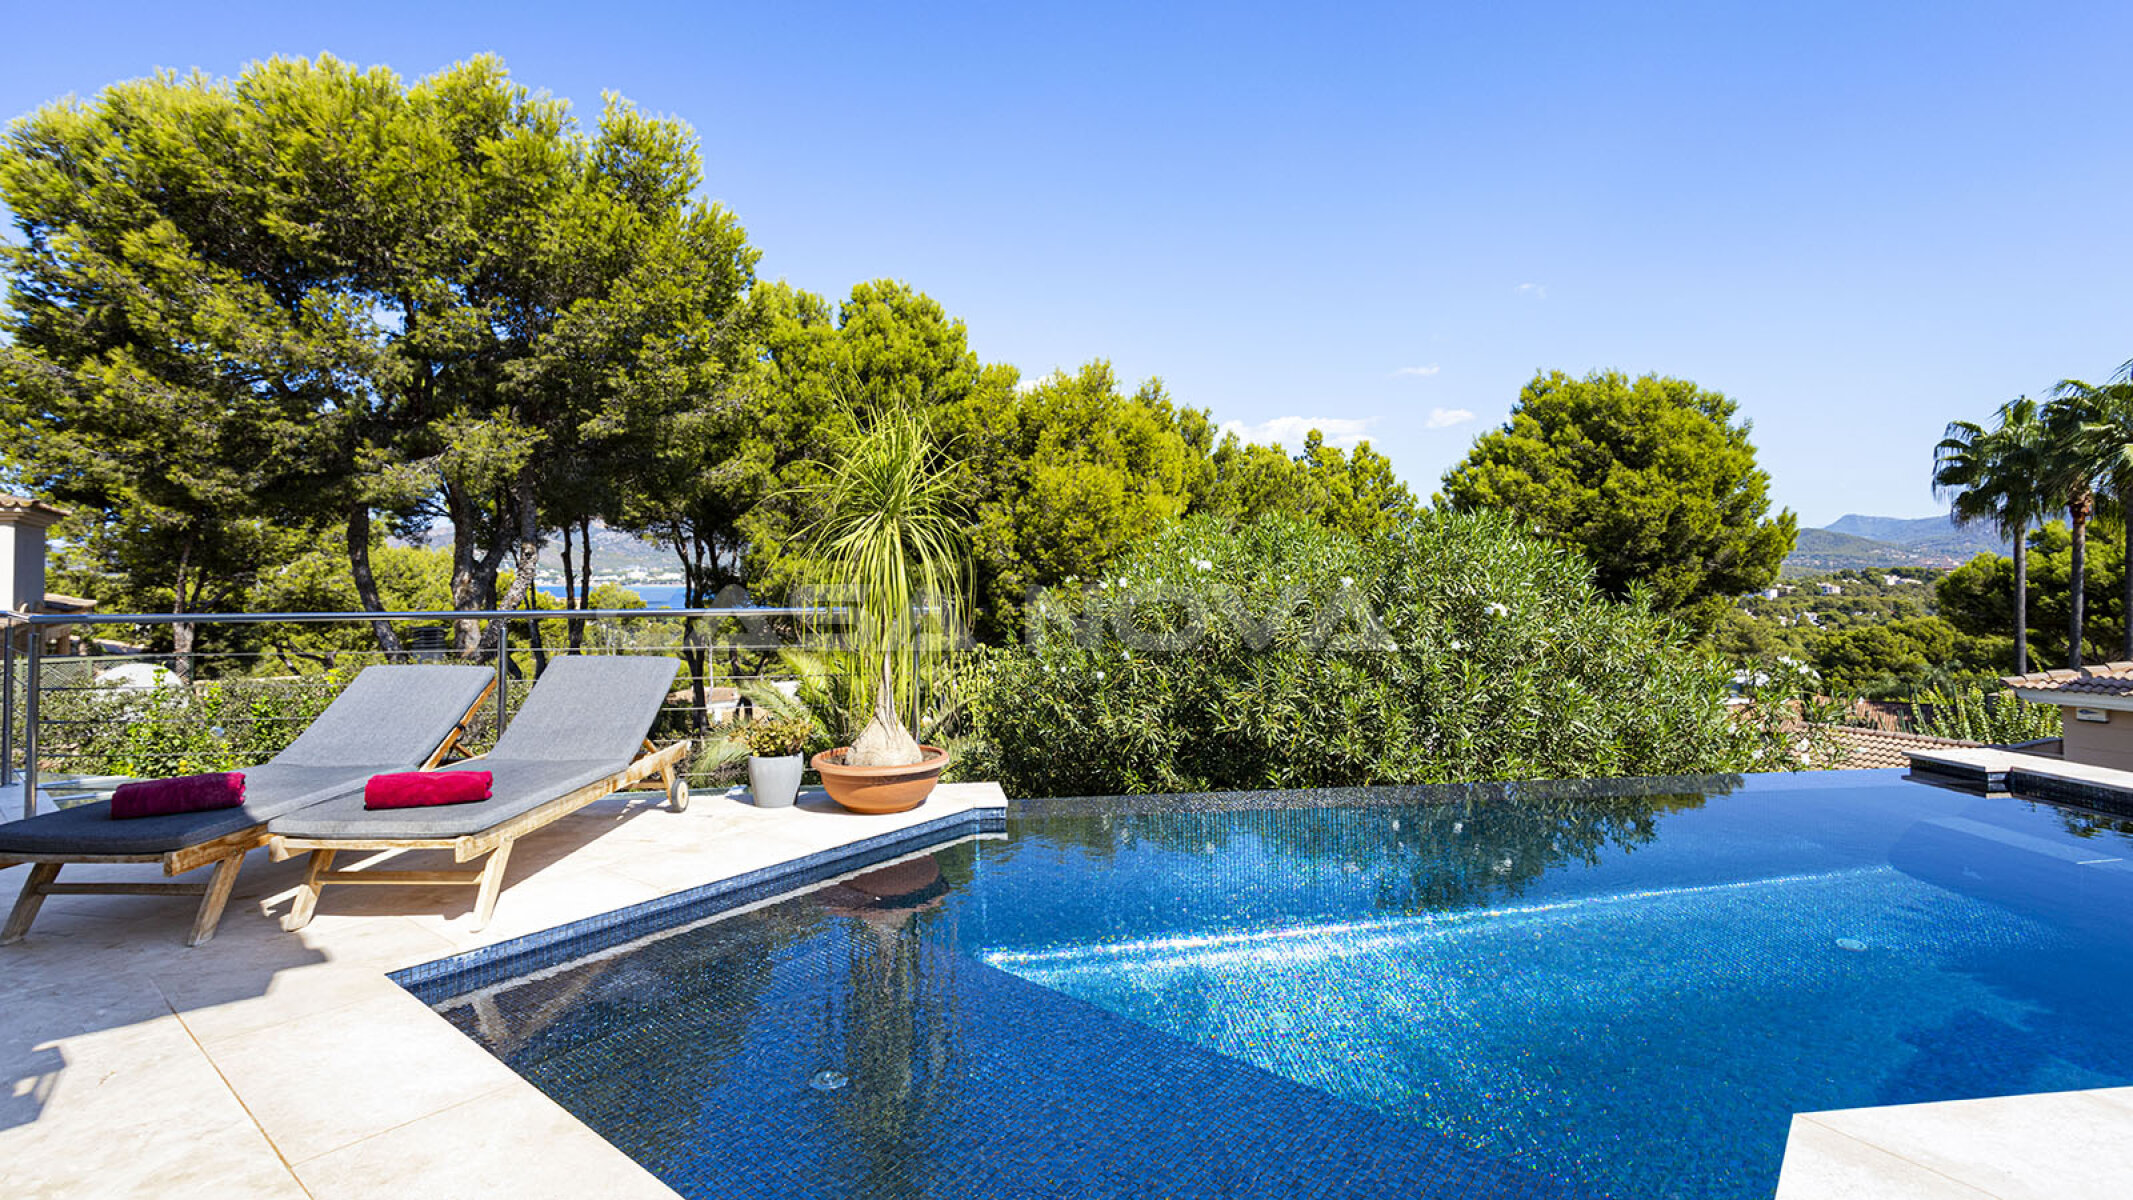 Refreshing swimming pool with views of the surrounding area